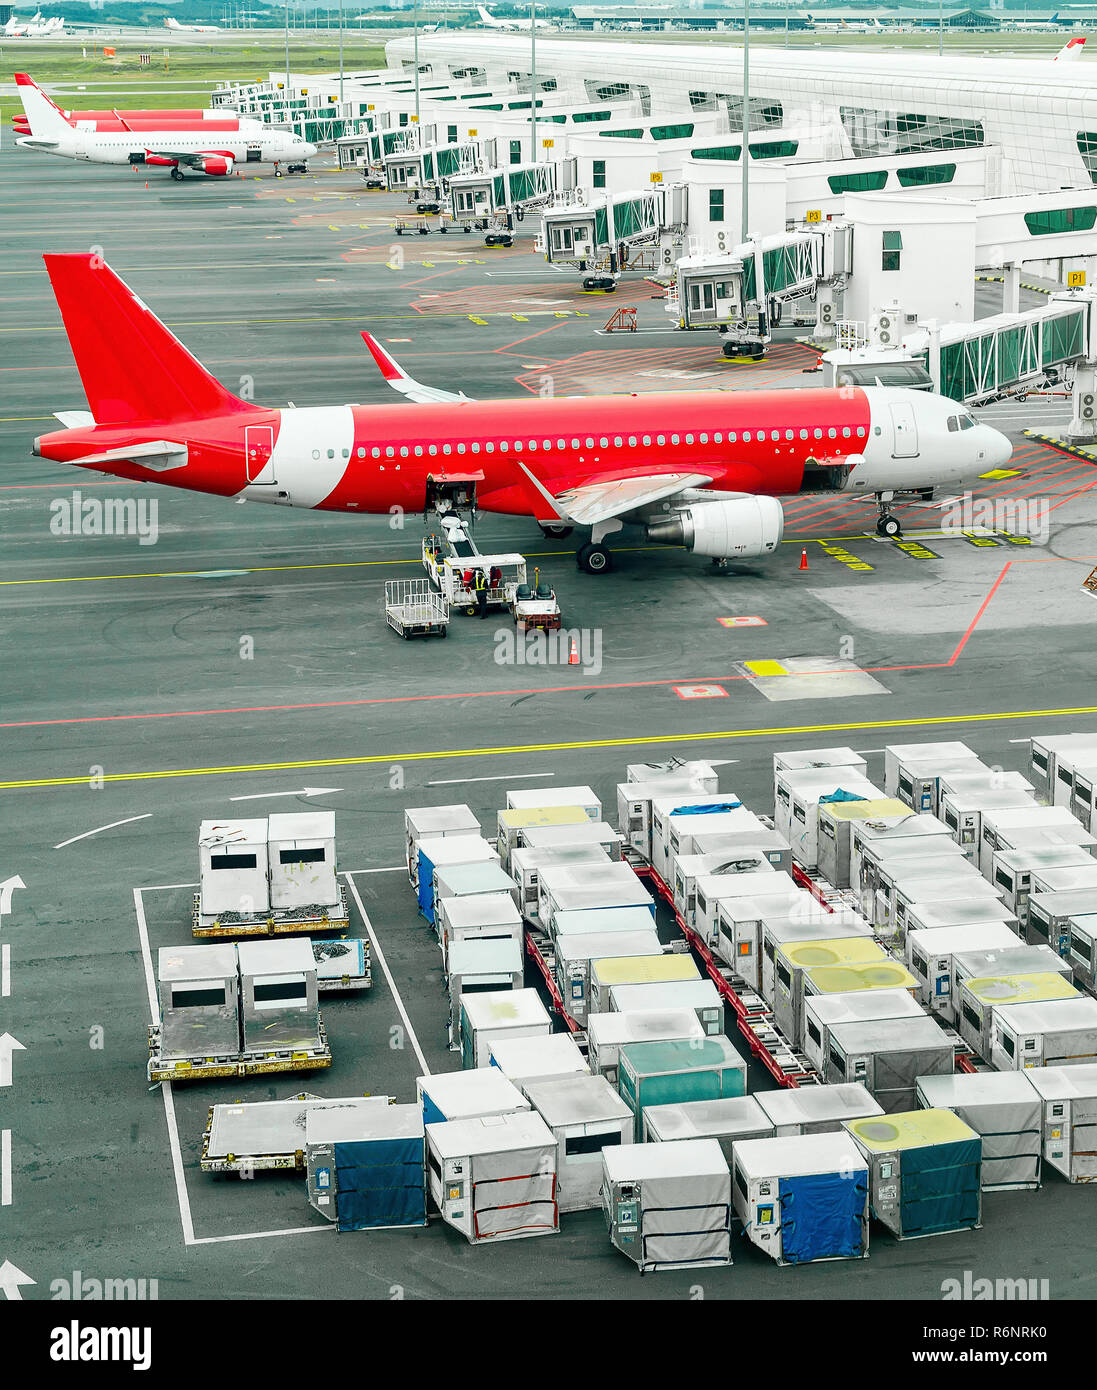 Airplanes and freight containers in airport of Kuala Lumpur, Malaysia Stock Photo